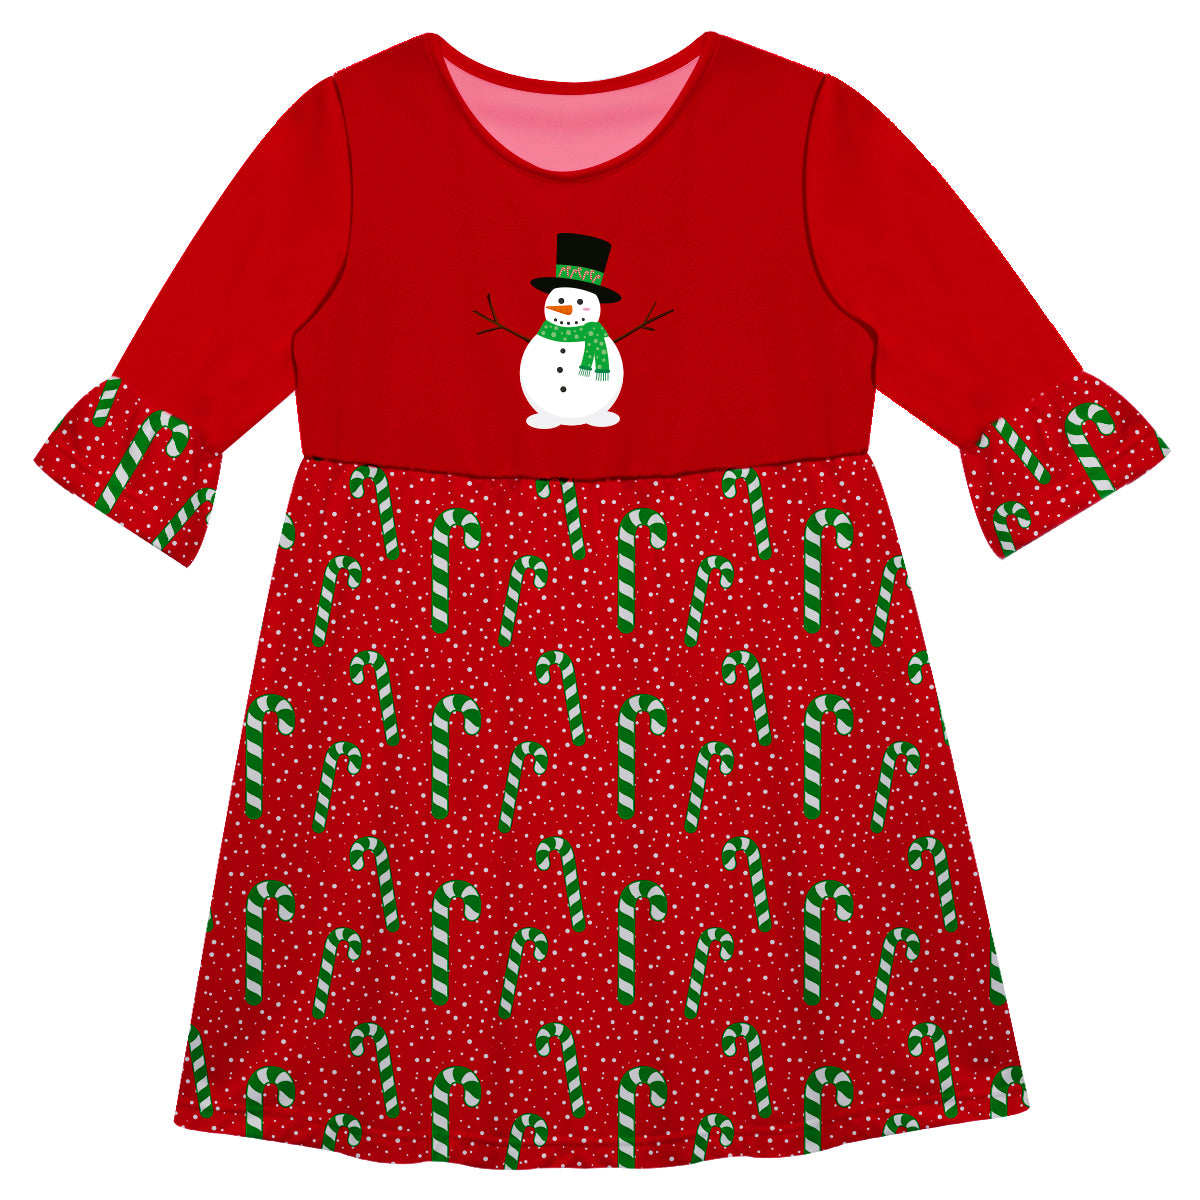 Girls red candy canes dress - Wimziy&Co.